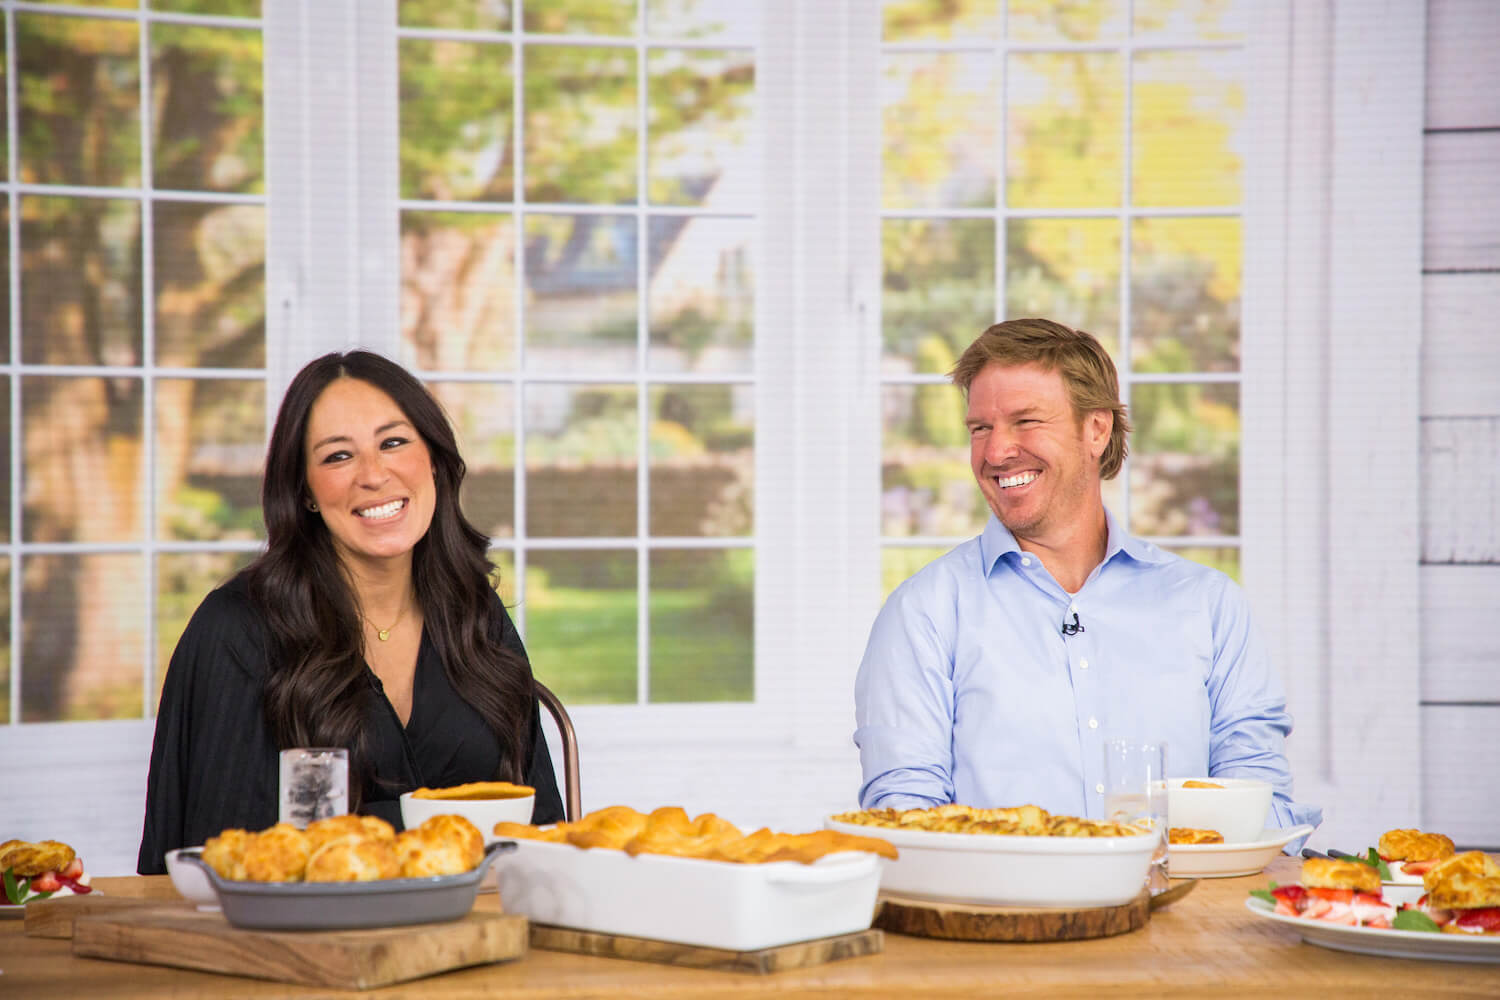 'Fixer Upper' stars Joanna Gaines and Chip Gaines sitting at a table with food